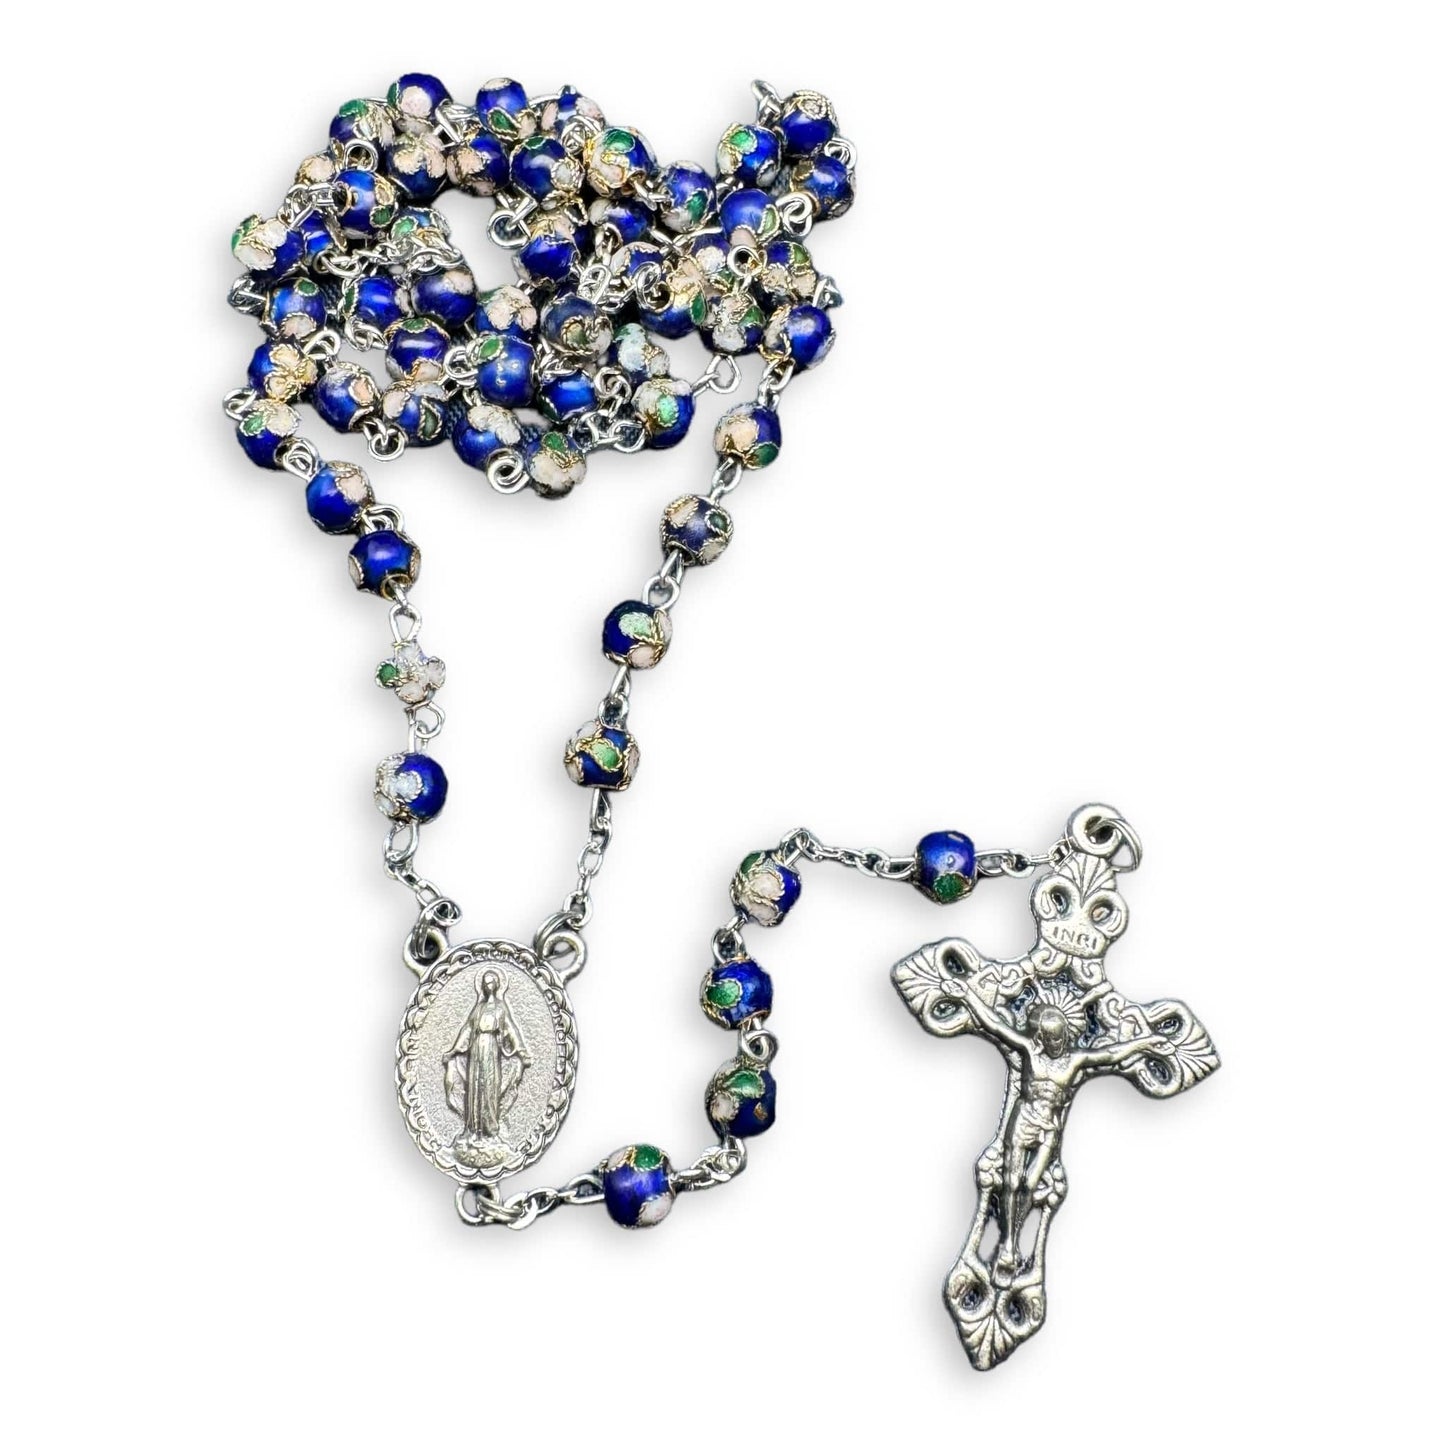 Catholically Rosaries Blue Cloisonne - Catholic Rosary - Small Beads - Blessed By Pope Francis